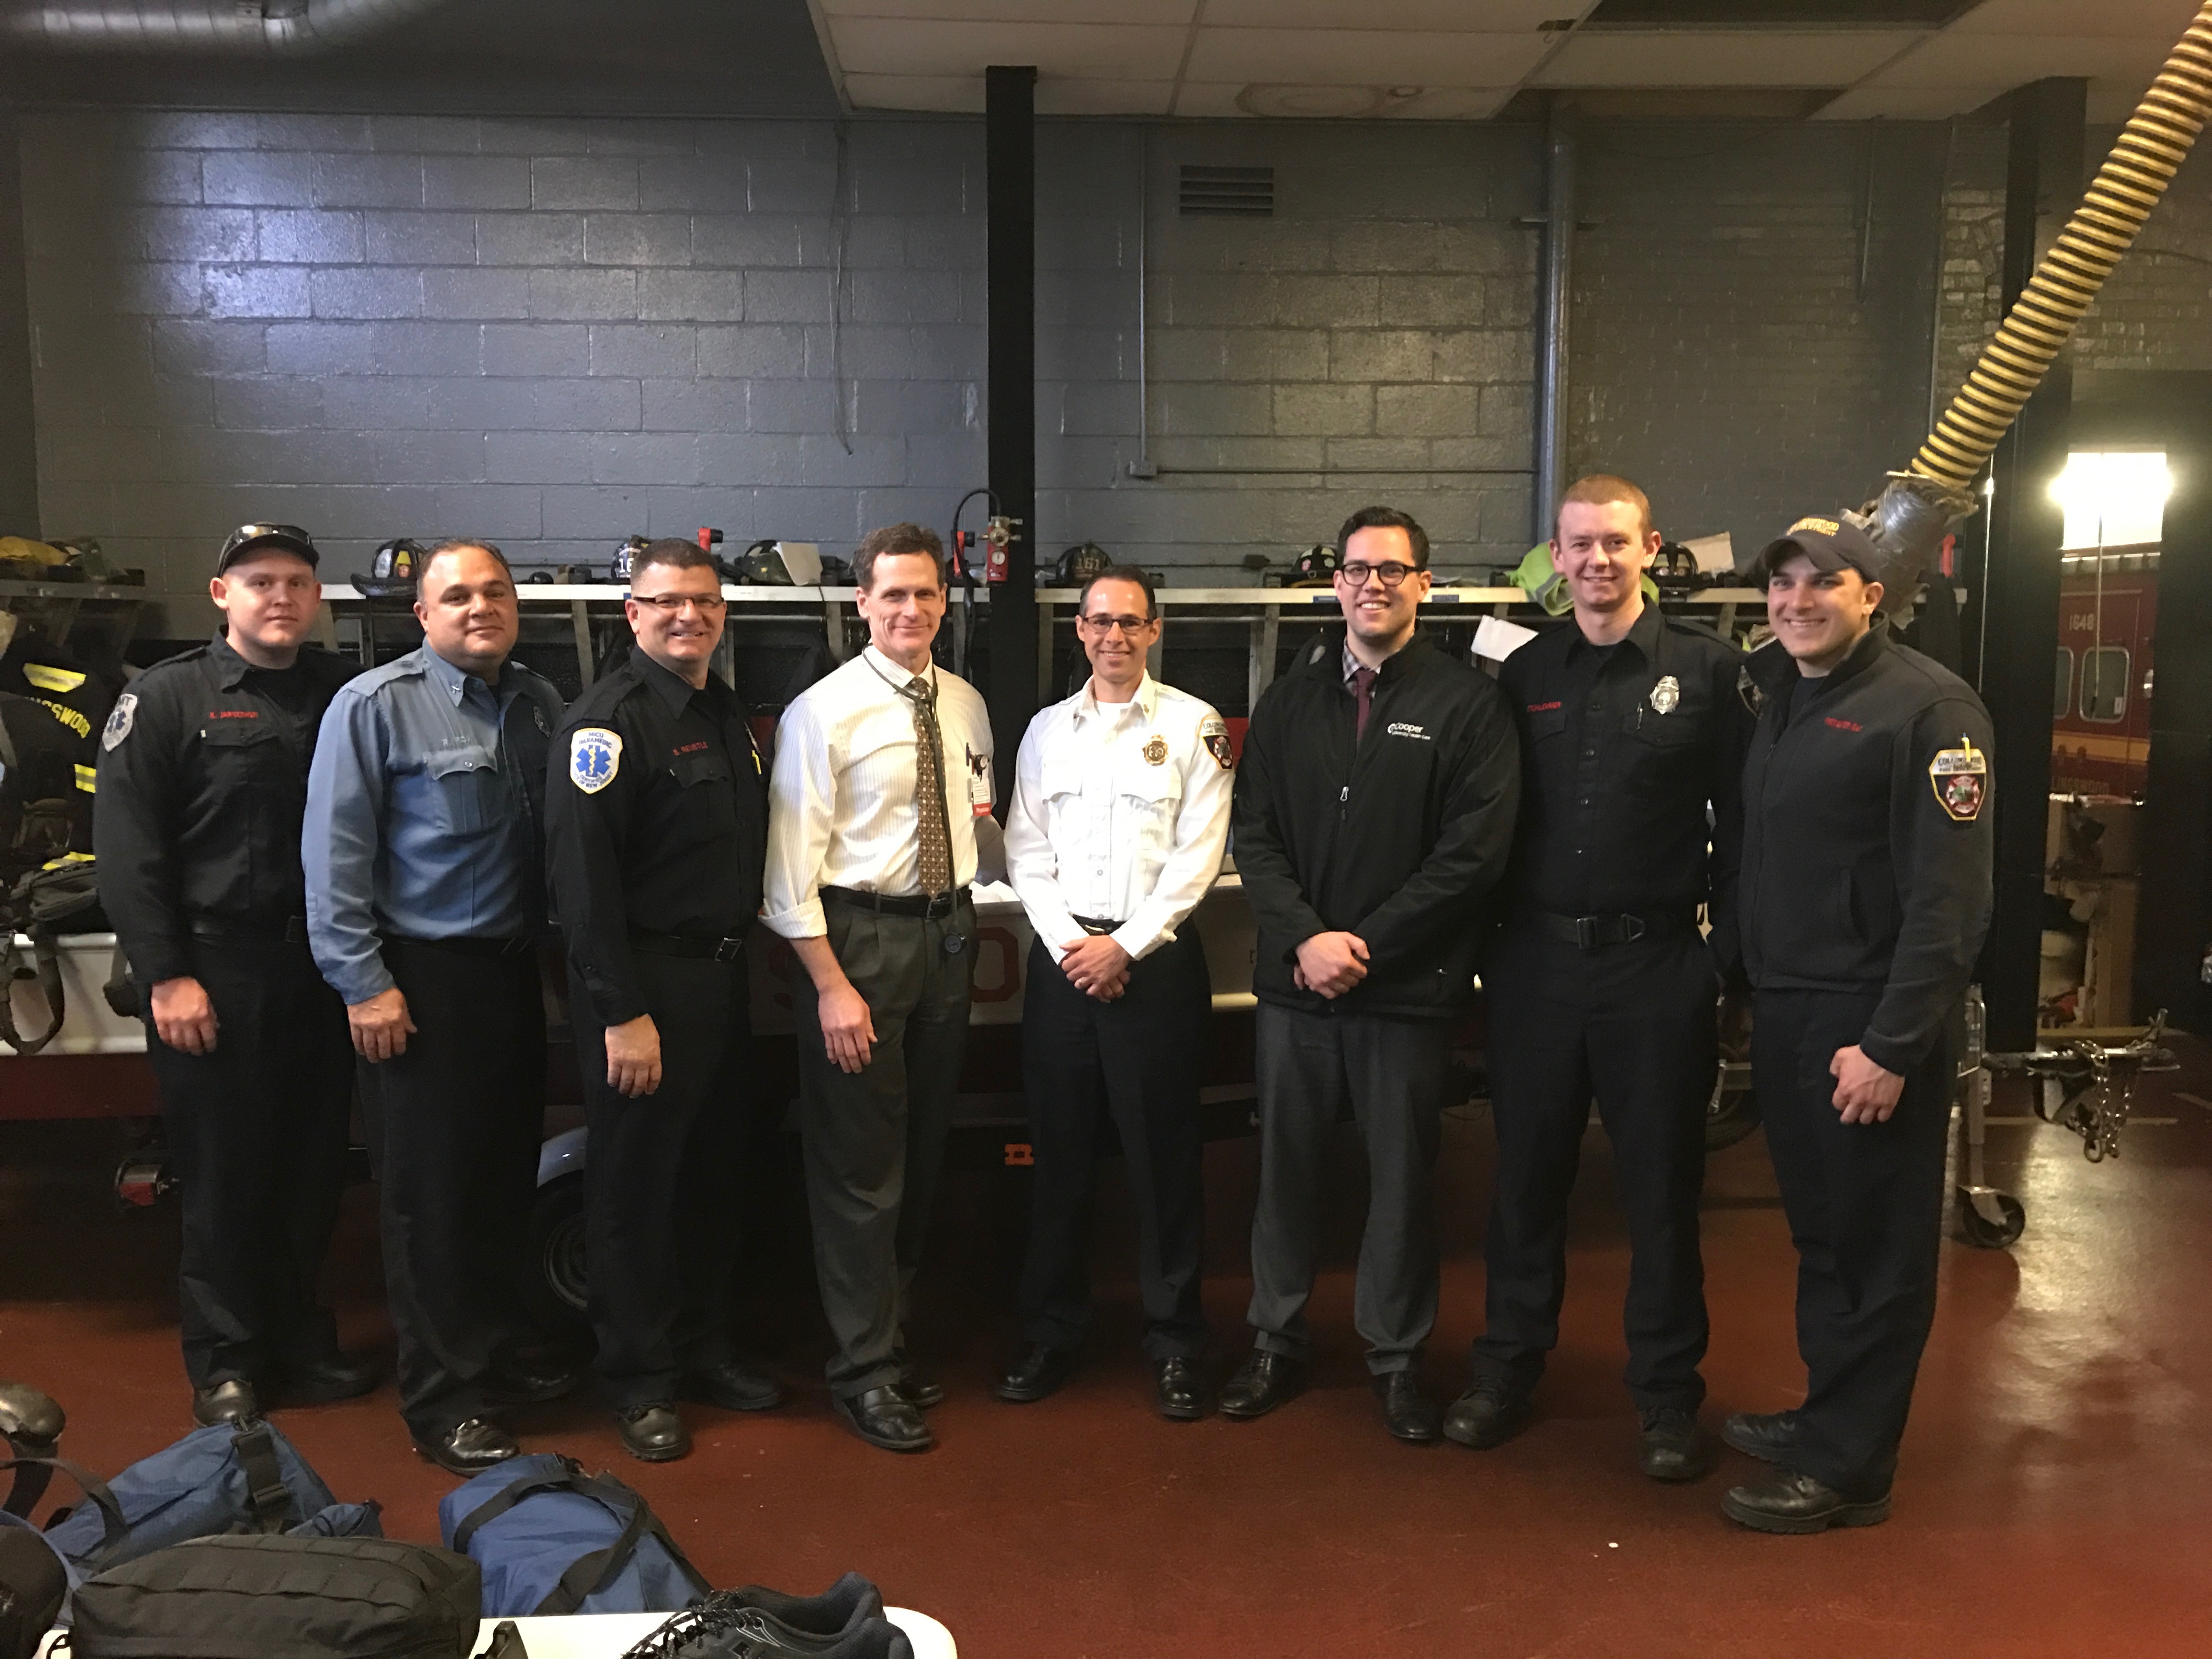 Group photo at Collingswood Fire Department